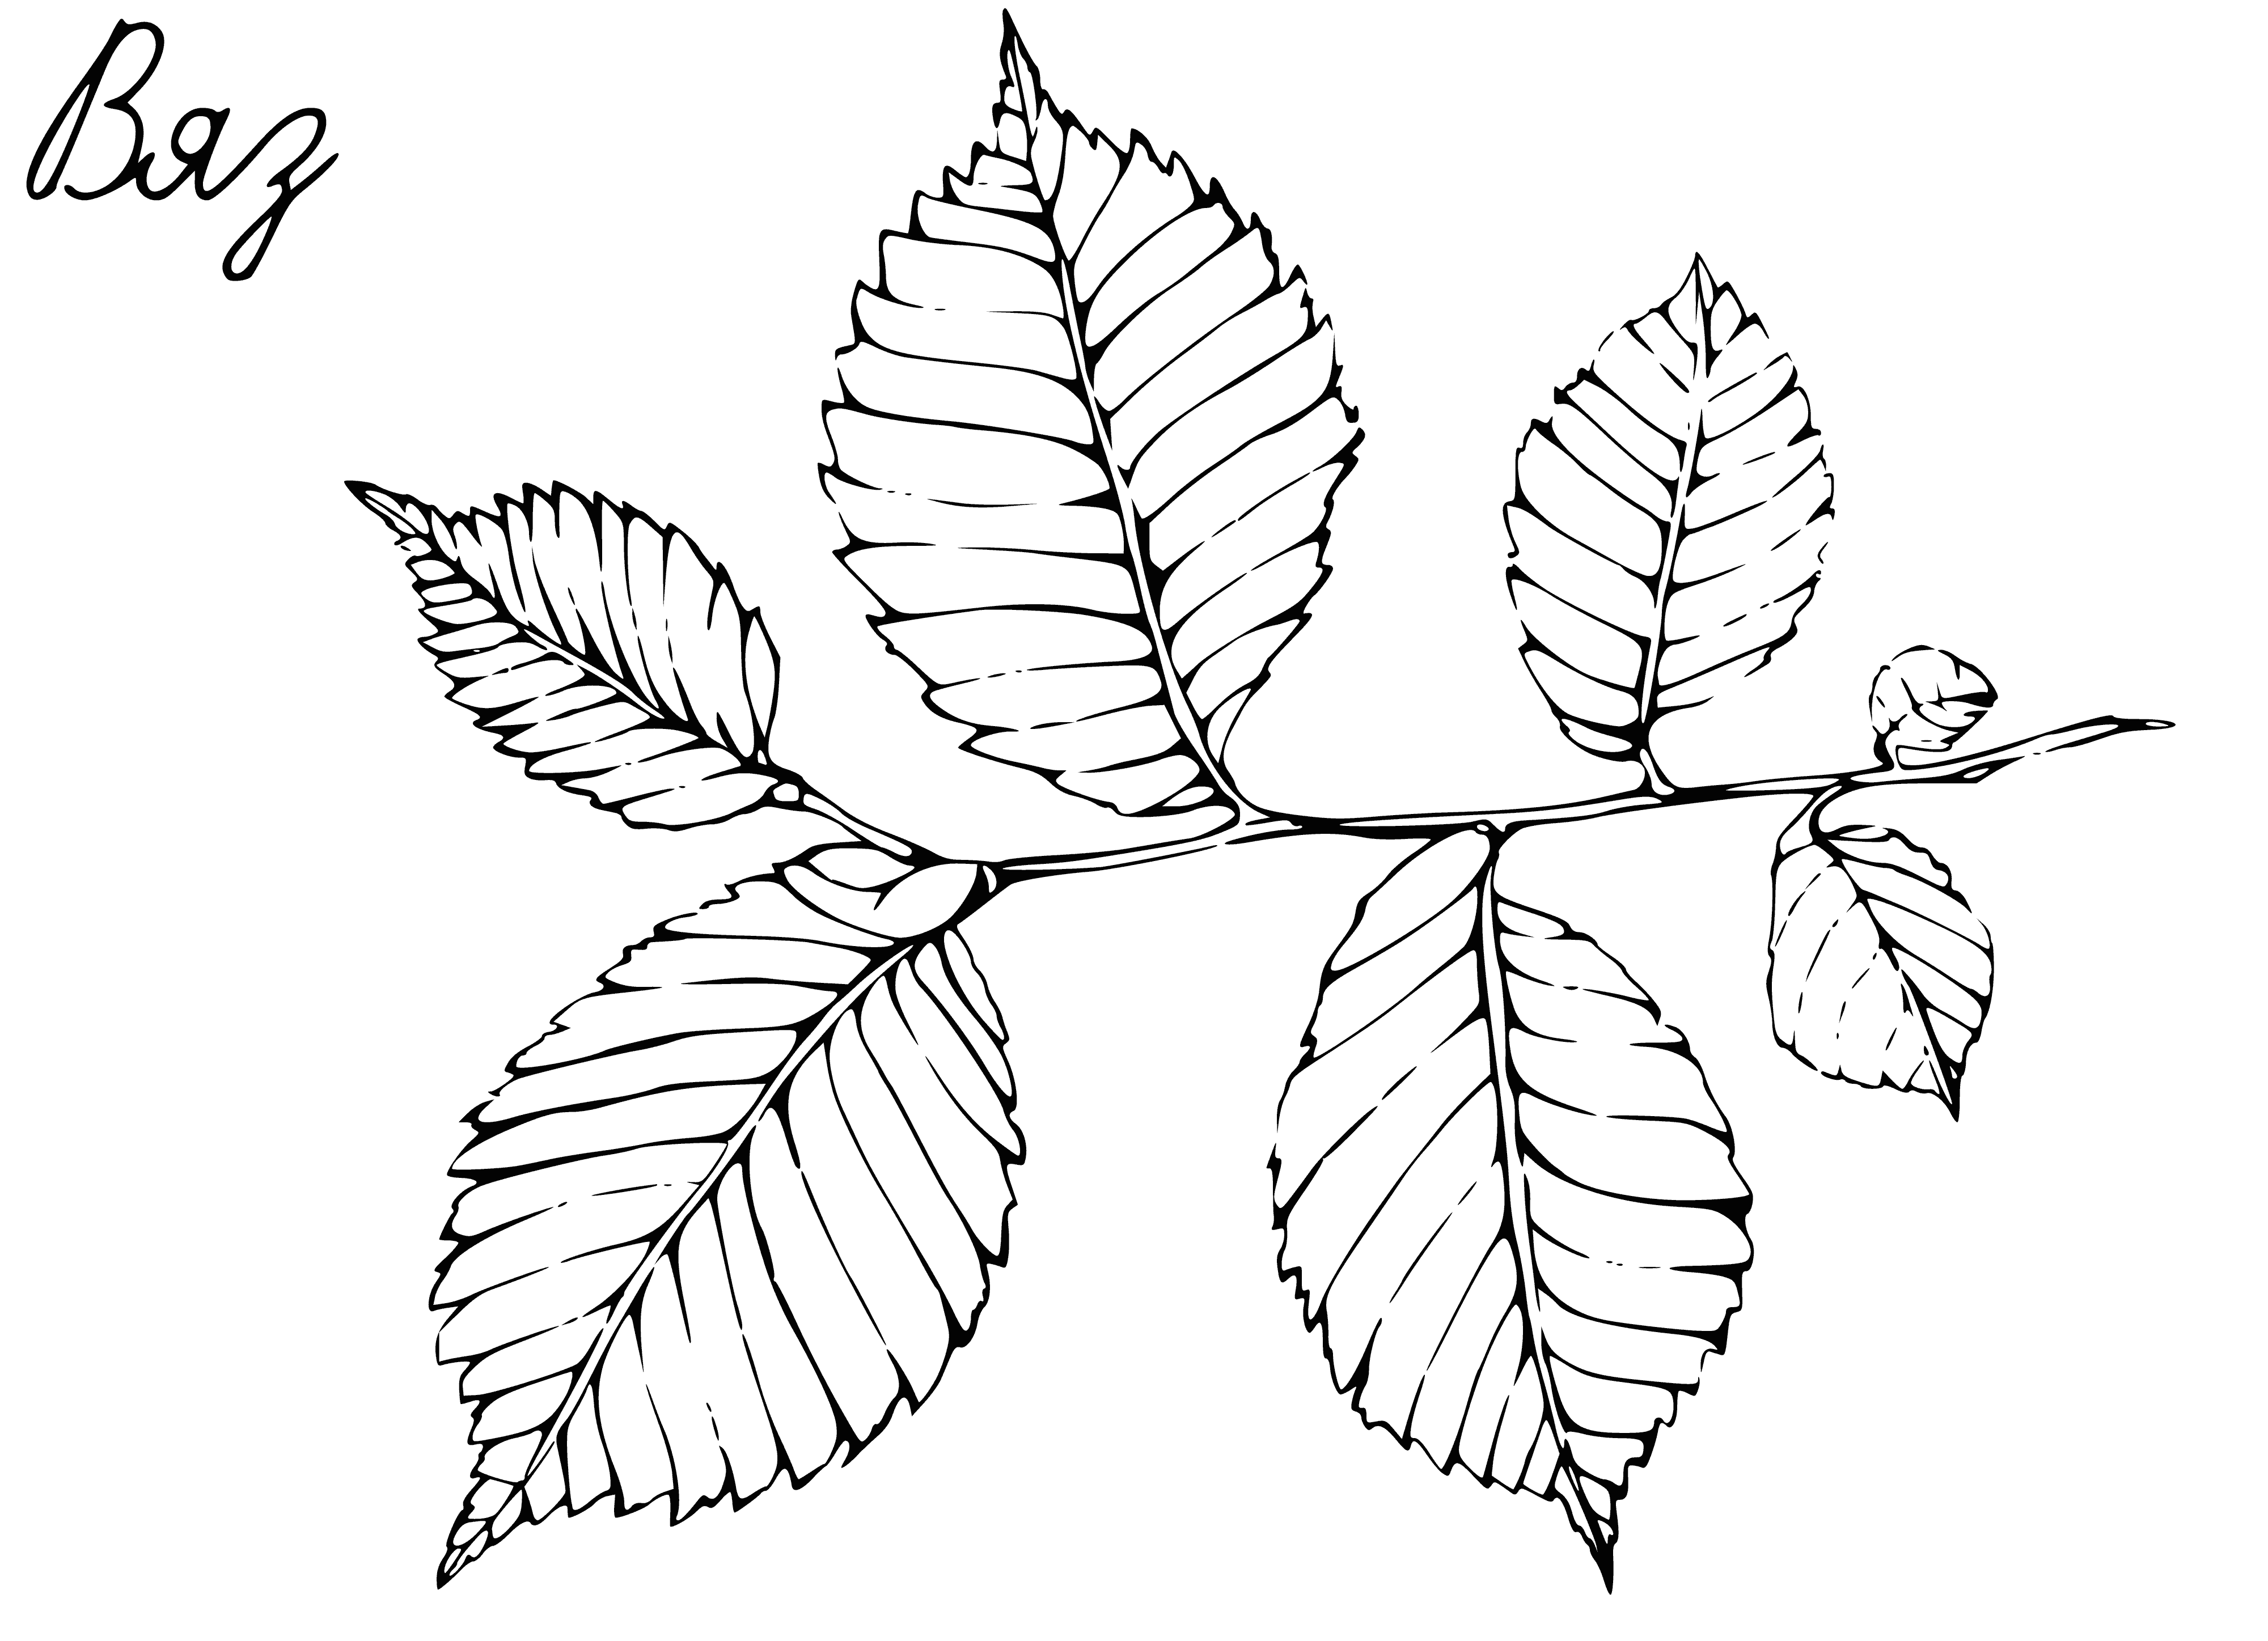 coloring page: Two elm leaves, a dark purple fruit with wrinkled surface on stem. Leaves long and thin, green with lighter greener edges.